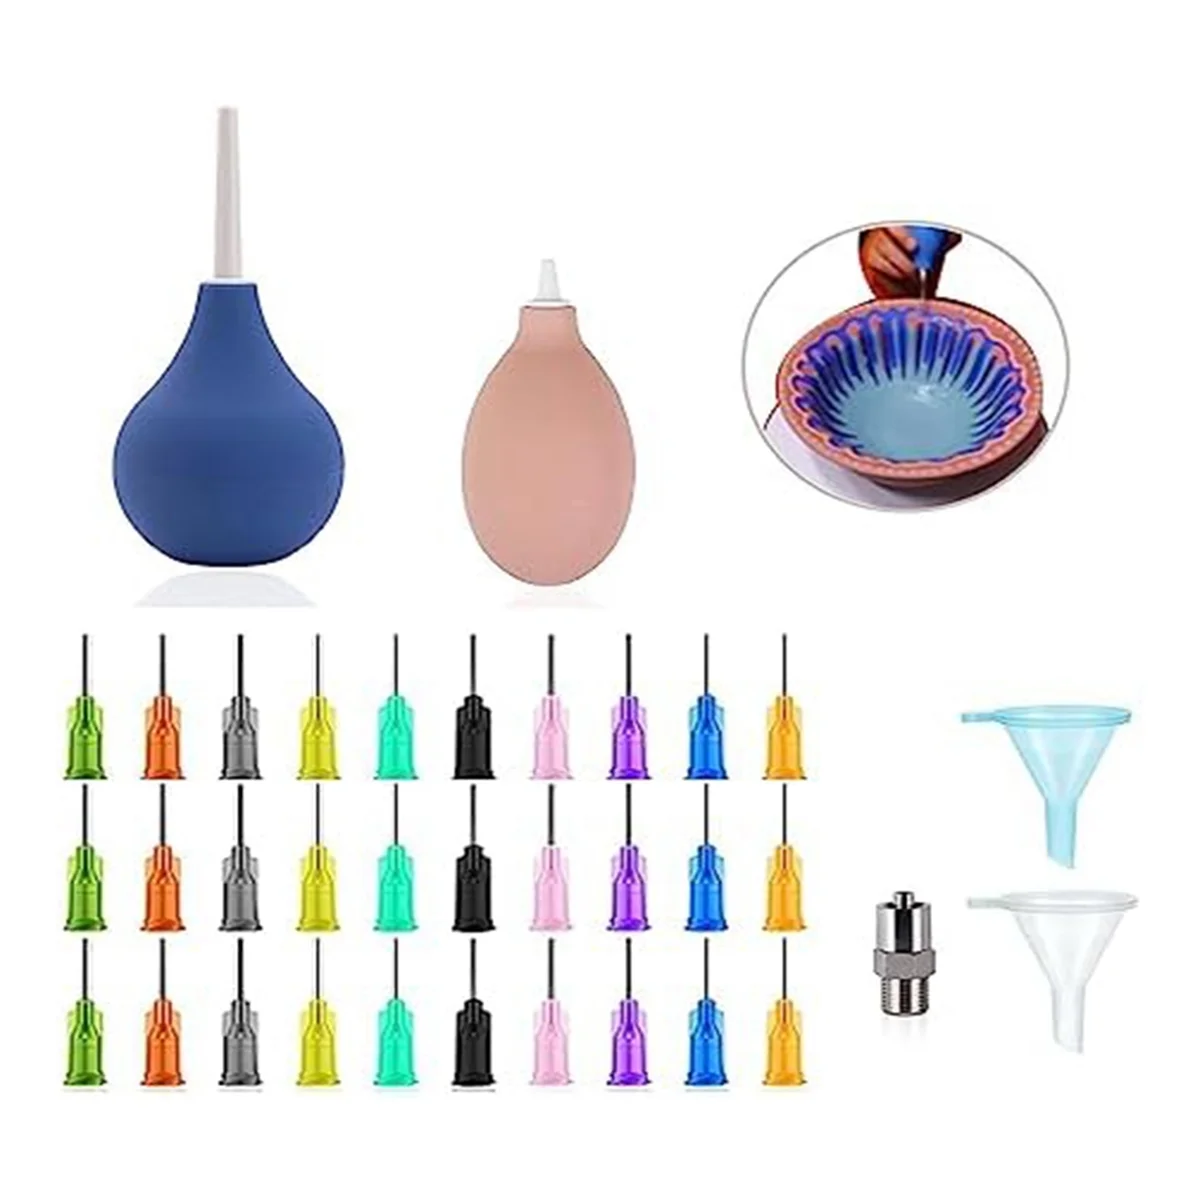 

Ceramic Precision Tip Applicator Bottle for Pottery Glaze Sliding Tail Pottery Glaze Squeeze Bottle for Clay Supplies